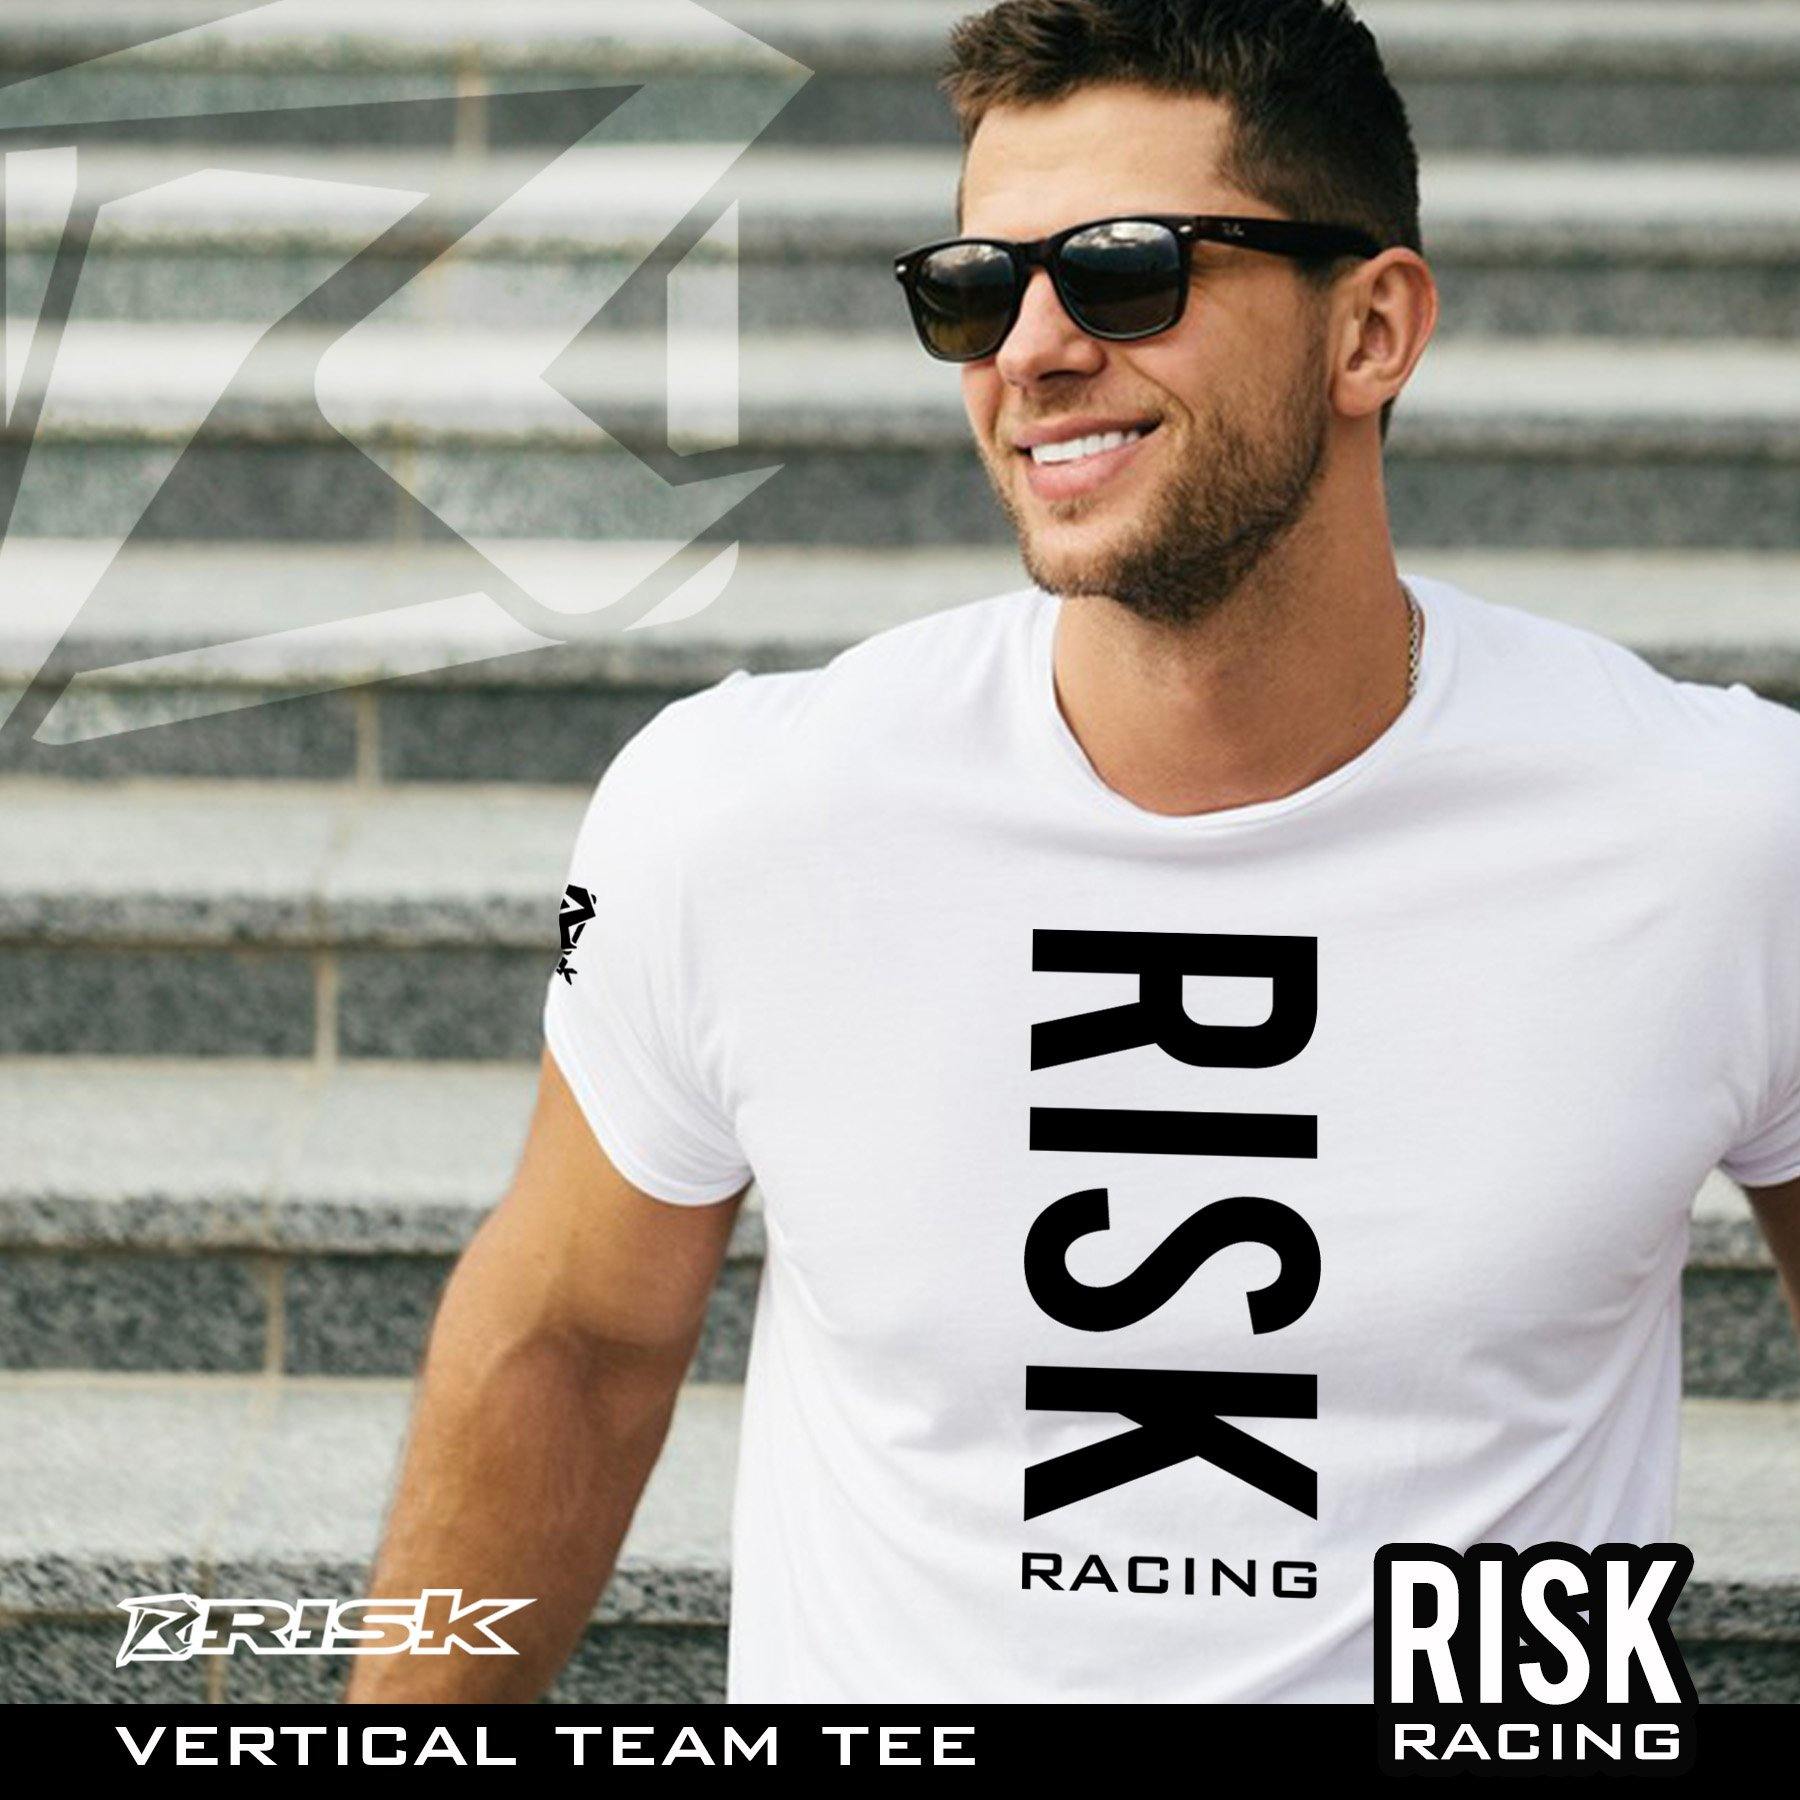 New Vertical Team Tee - Now Available - Risk Racing